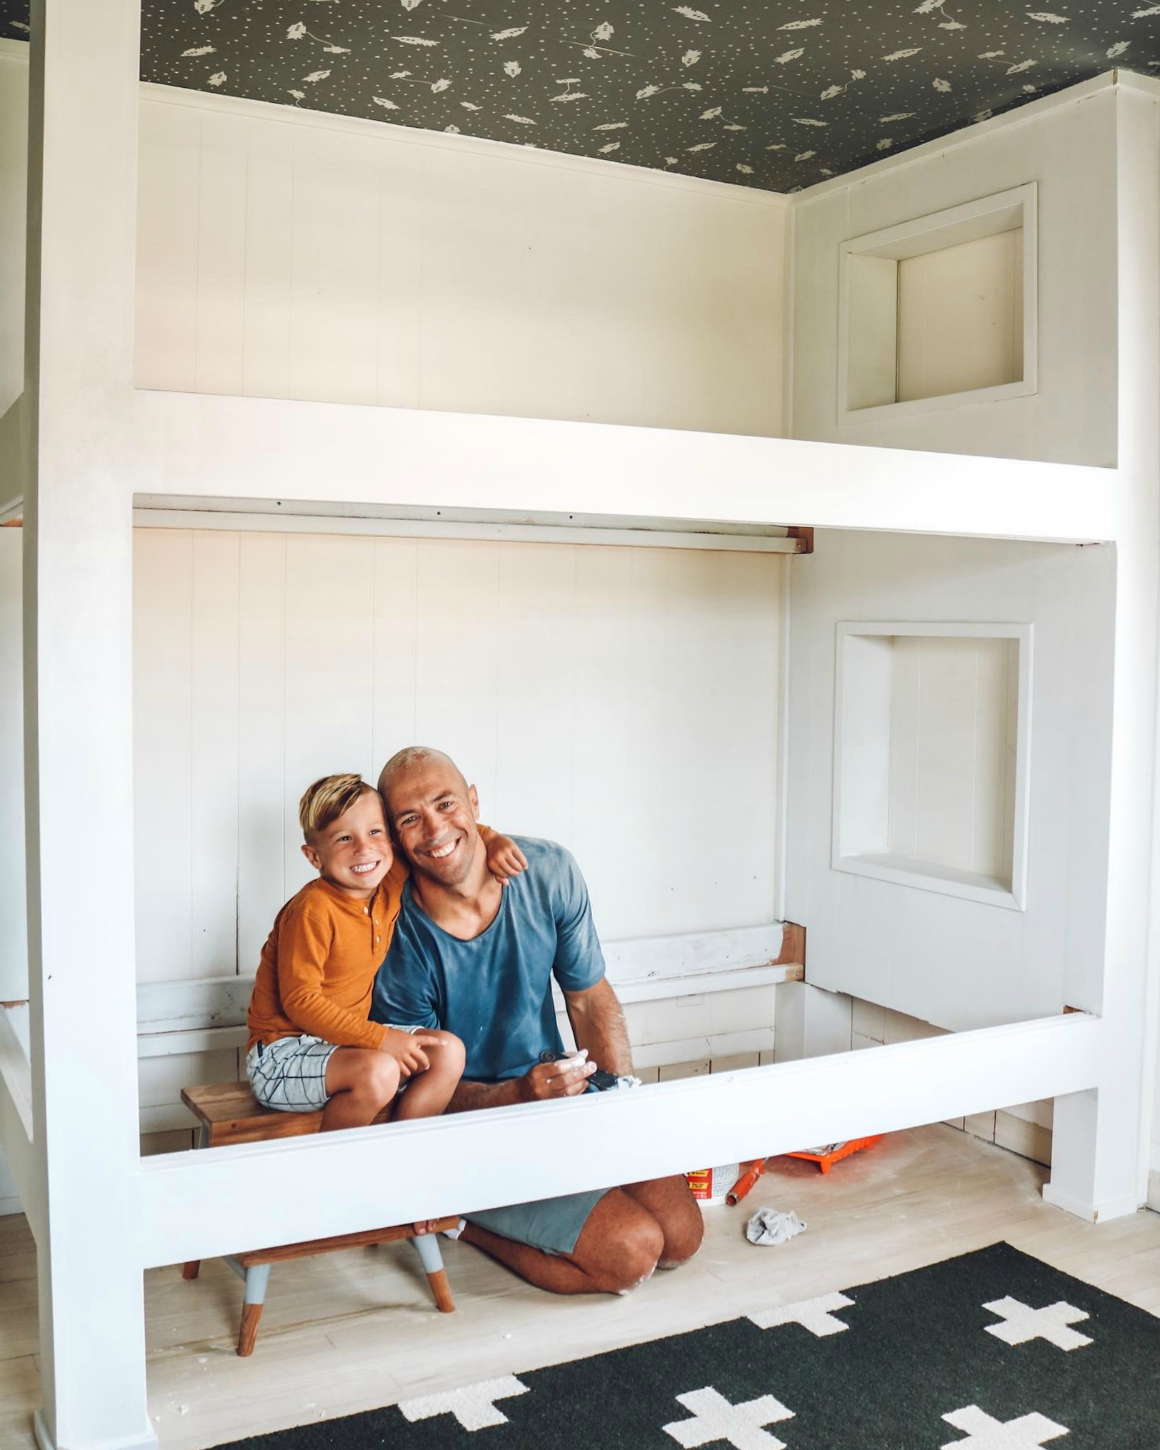 Built In Bunkbed Diy For 500 Nesting, How To Build Bunk Beds With Drawers